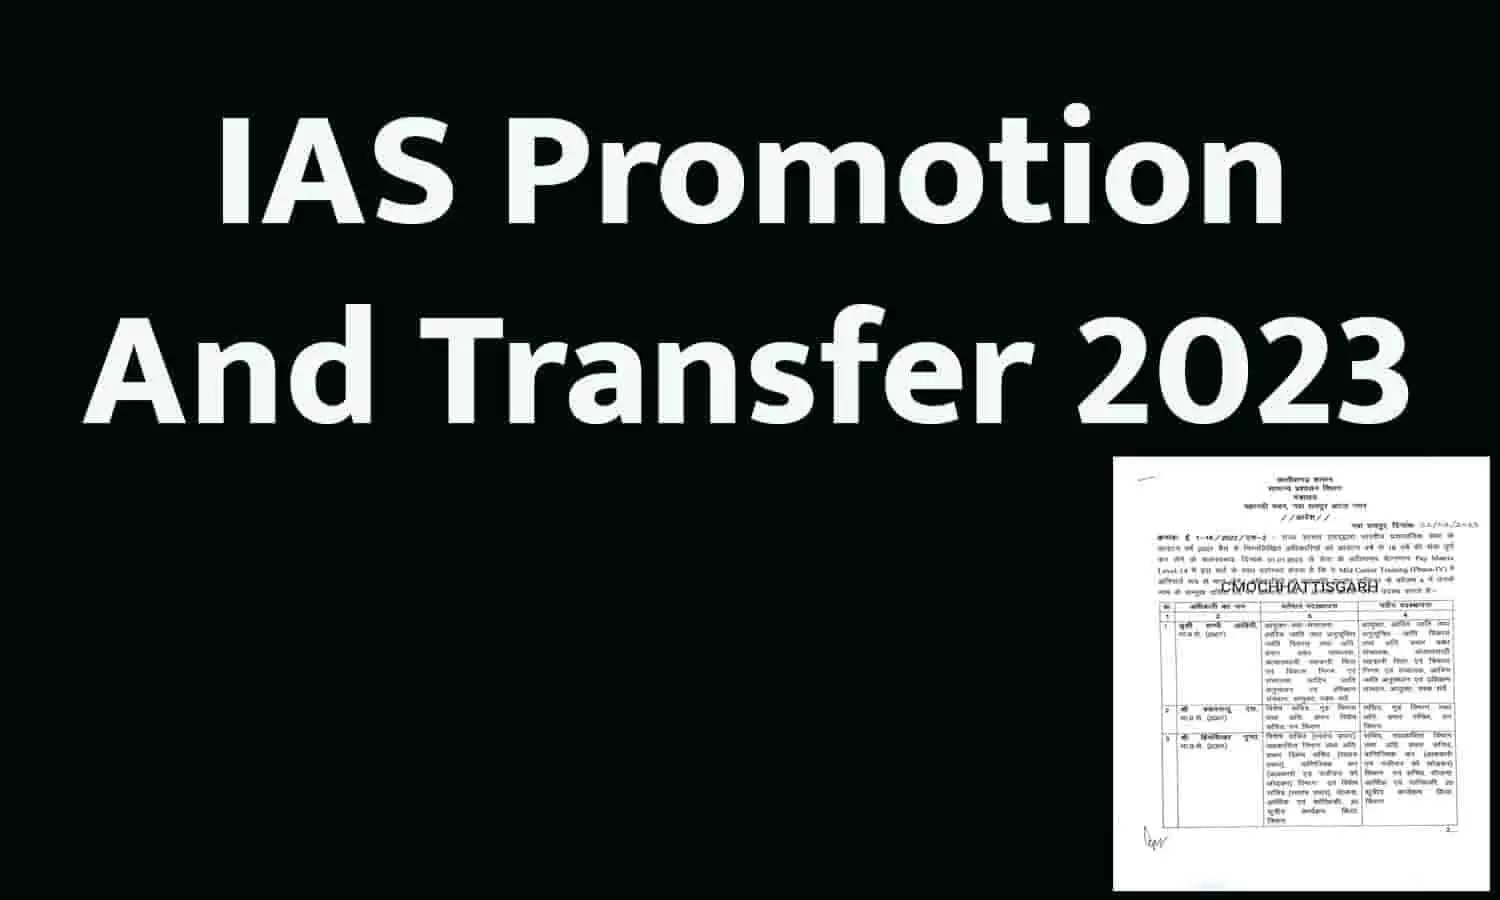 IAS Promotion and Transfer 2023